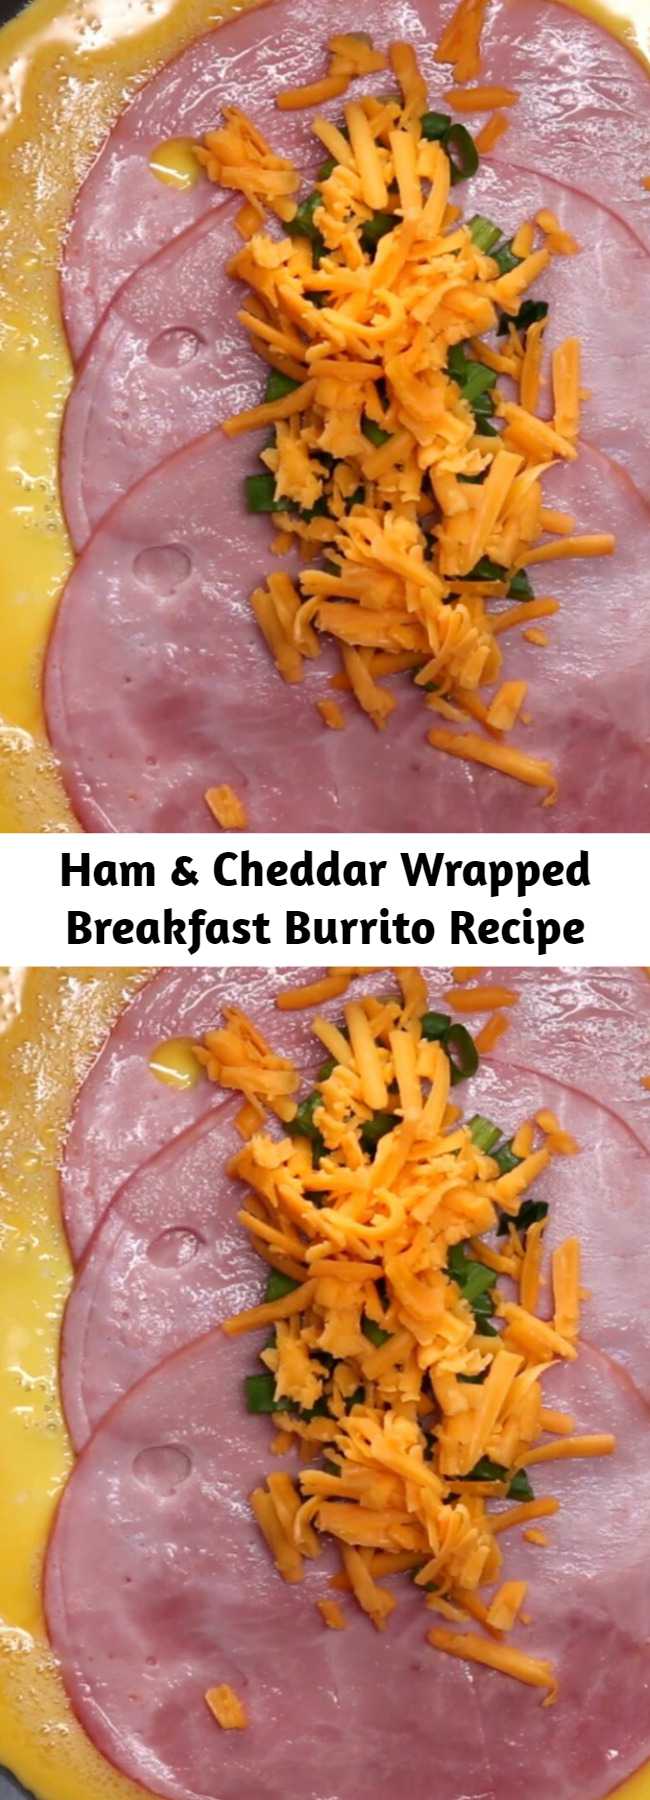 Ham & Cheddar Wrapped Breakfast Burrito Recipe - You can make these freezable breakfast burritos in minutes. A delicious breakfast to go.